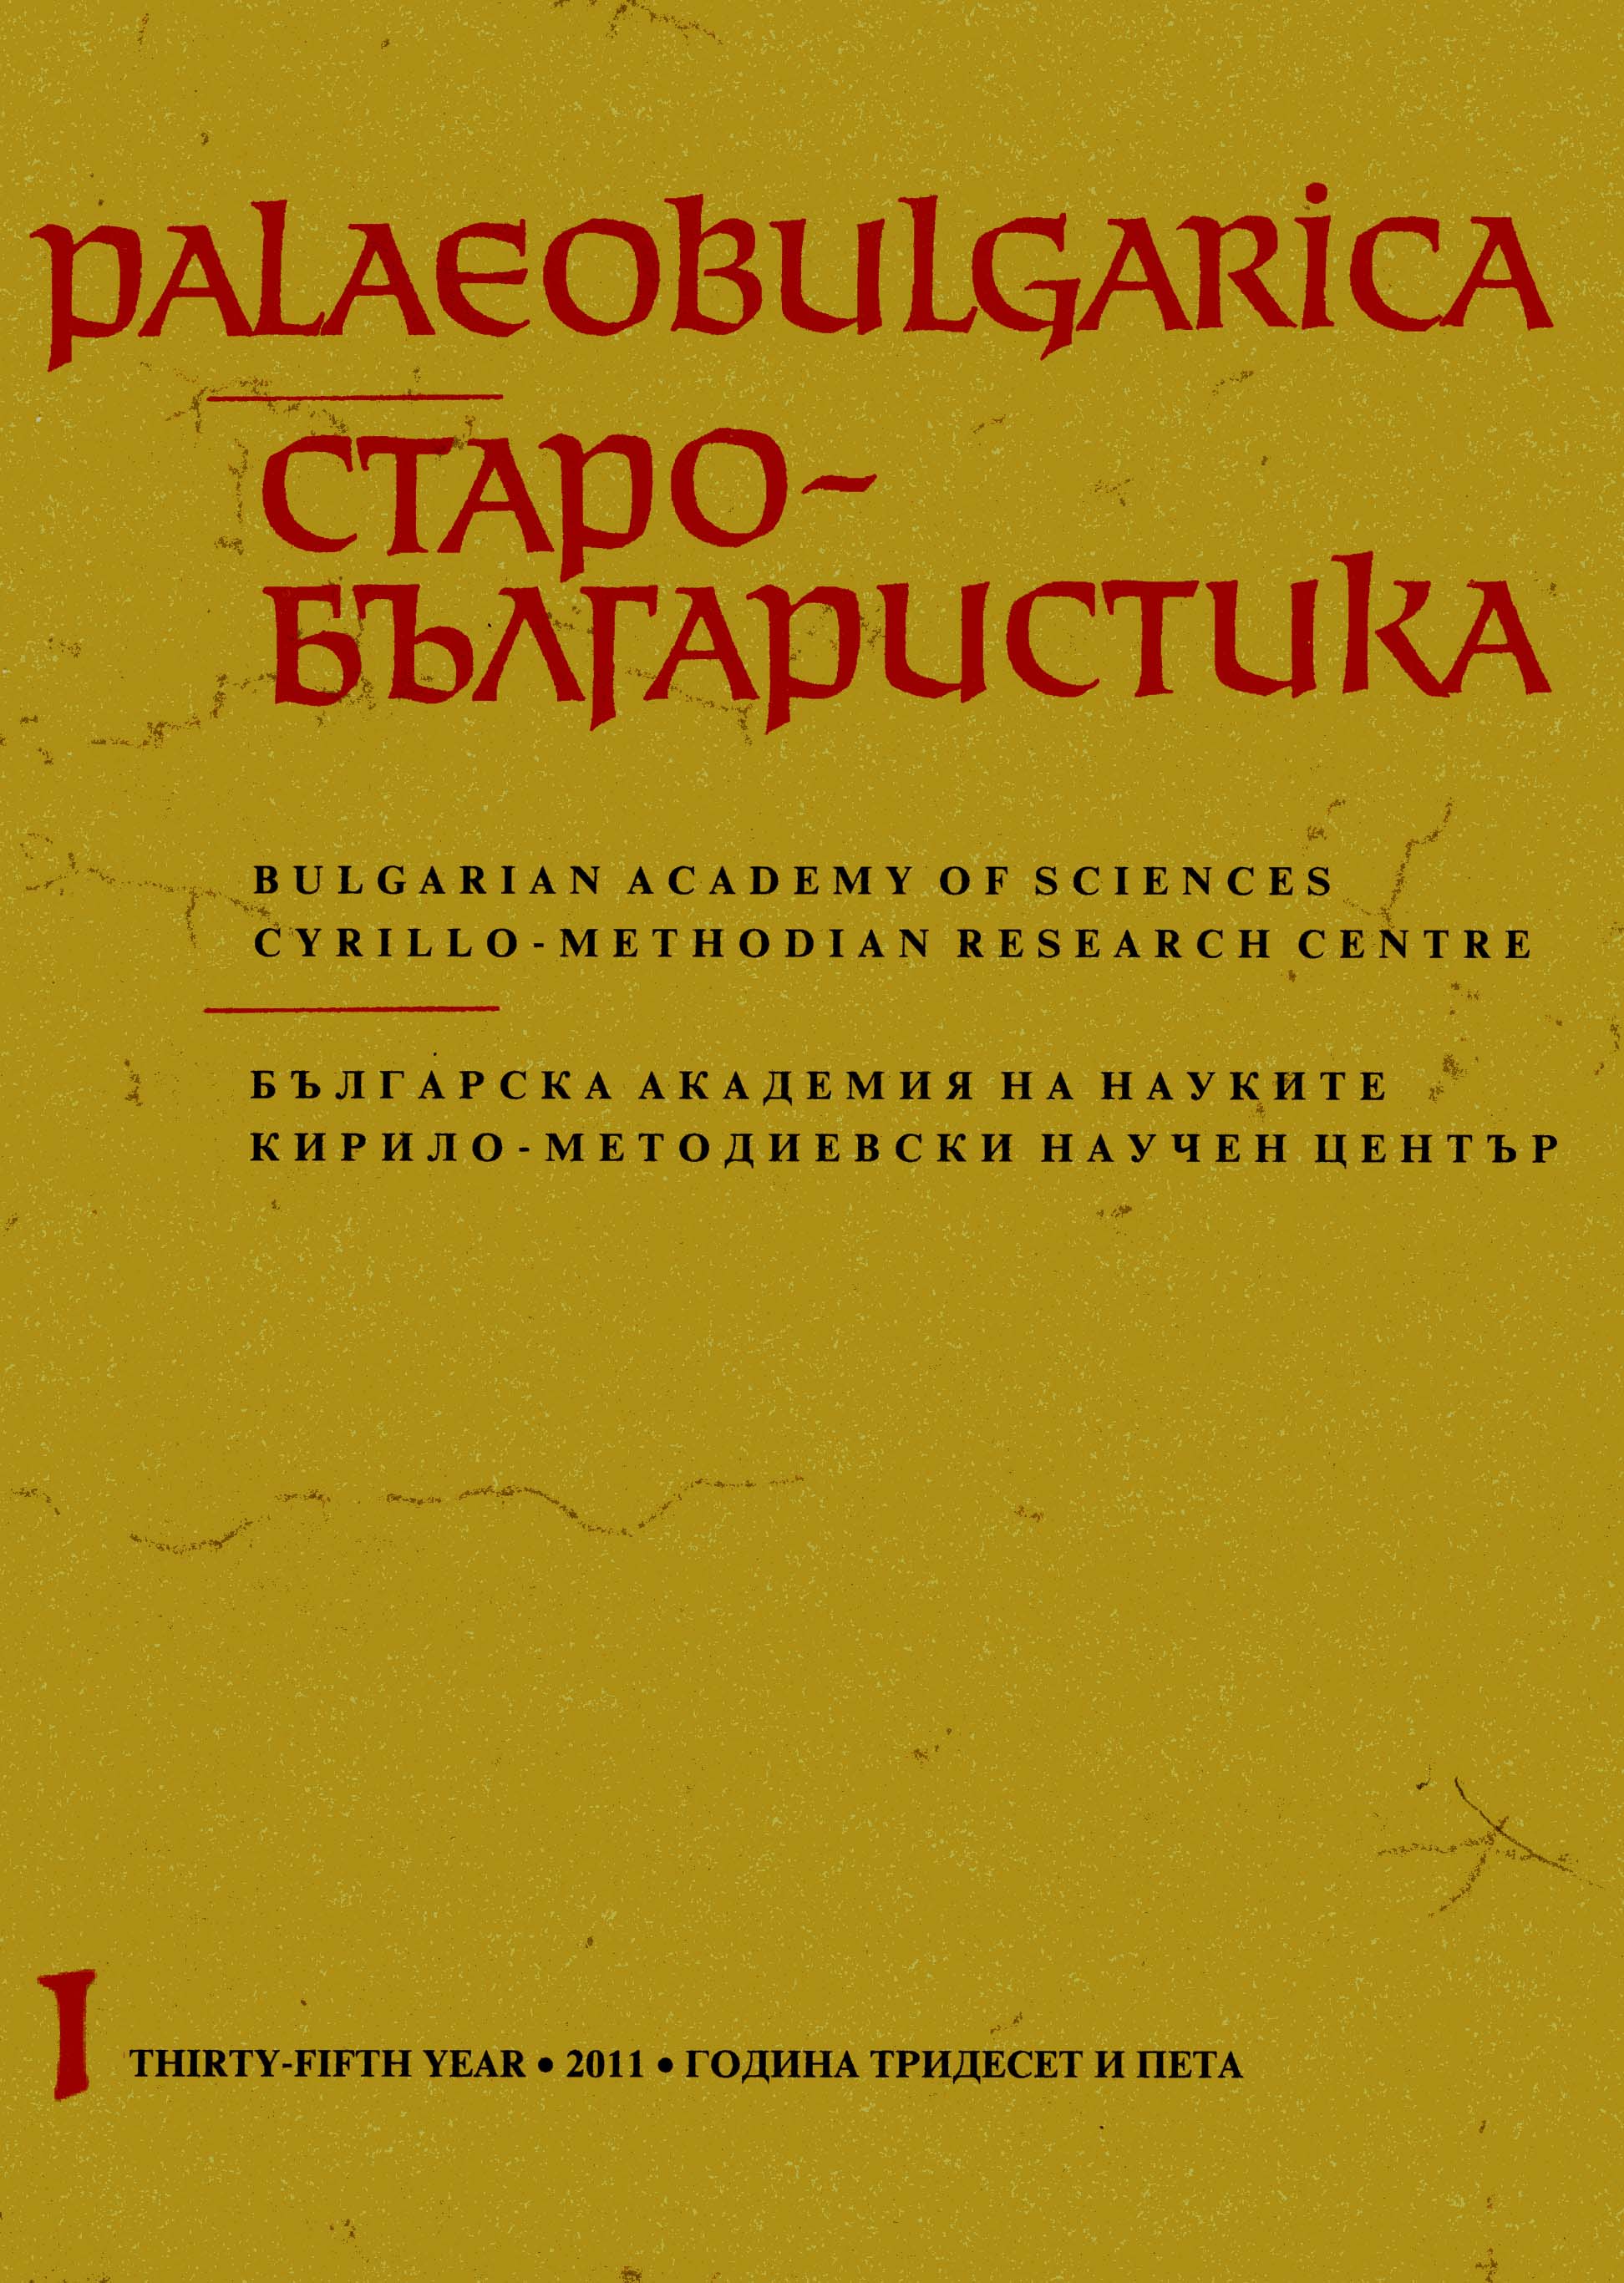 – The Catalogue of Greek Musical Manuscripts from St. Catherine's Monastery on Mount Sinai Cover Image